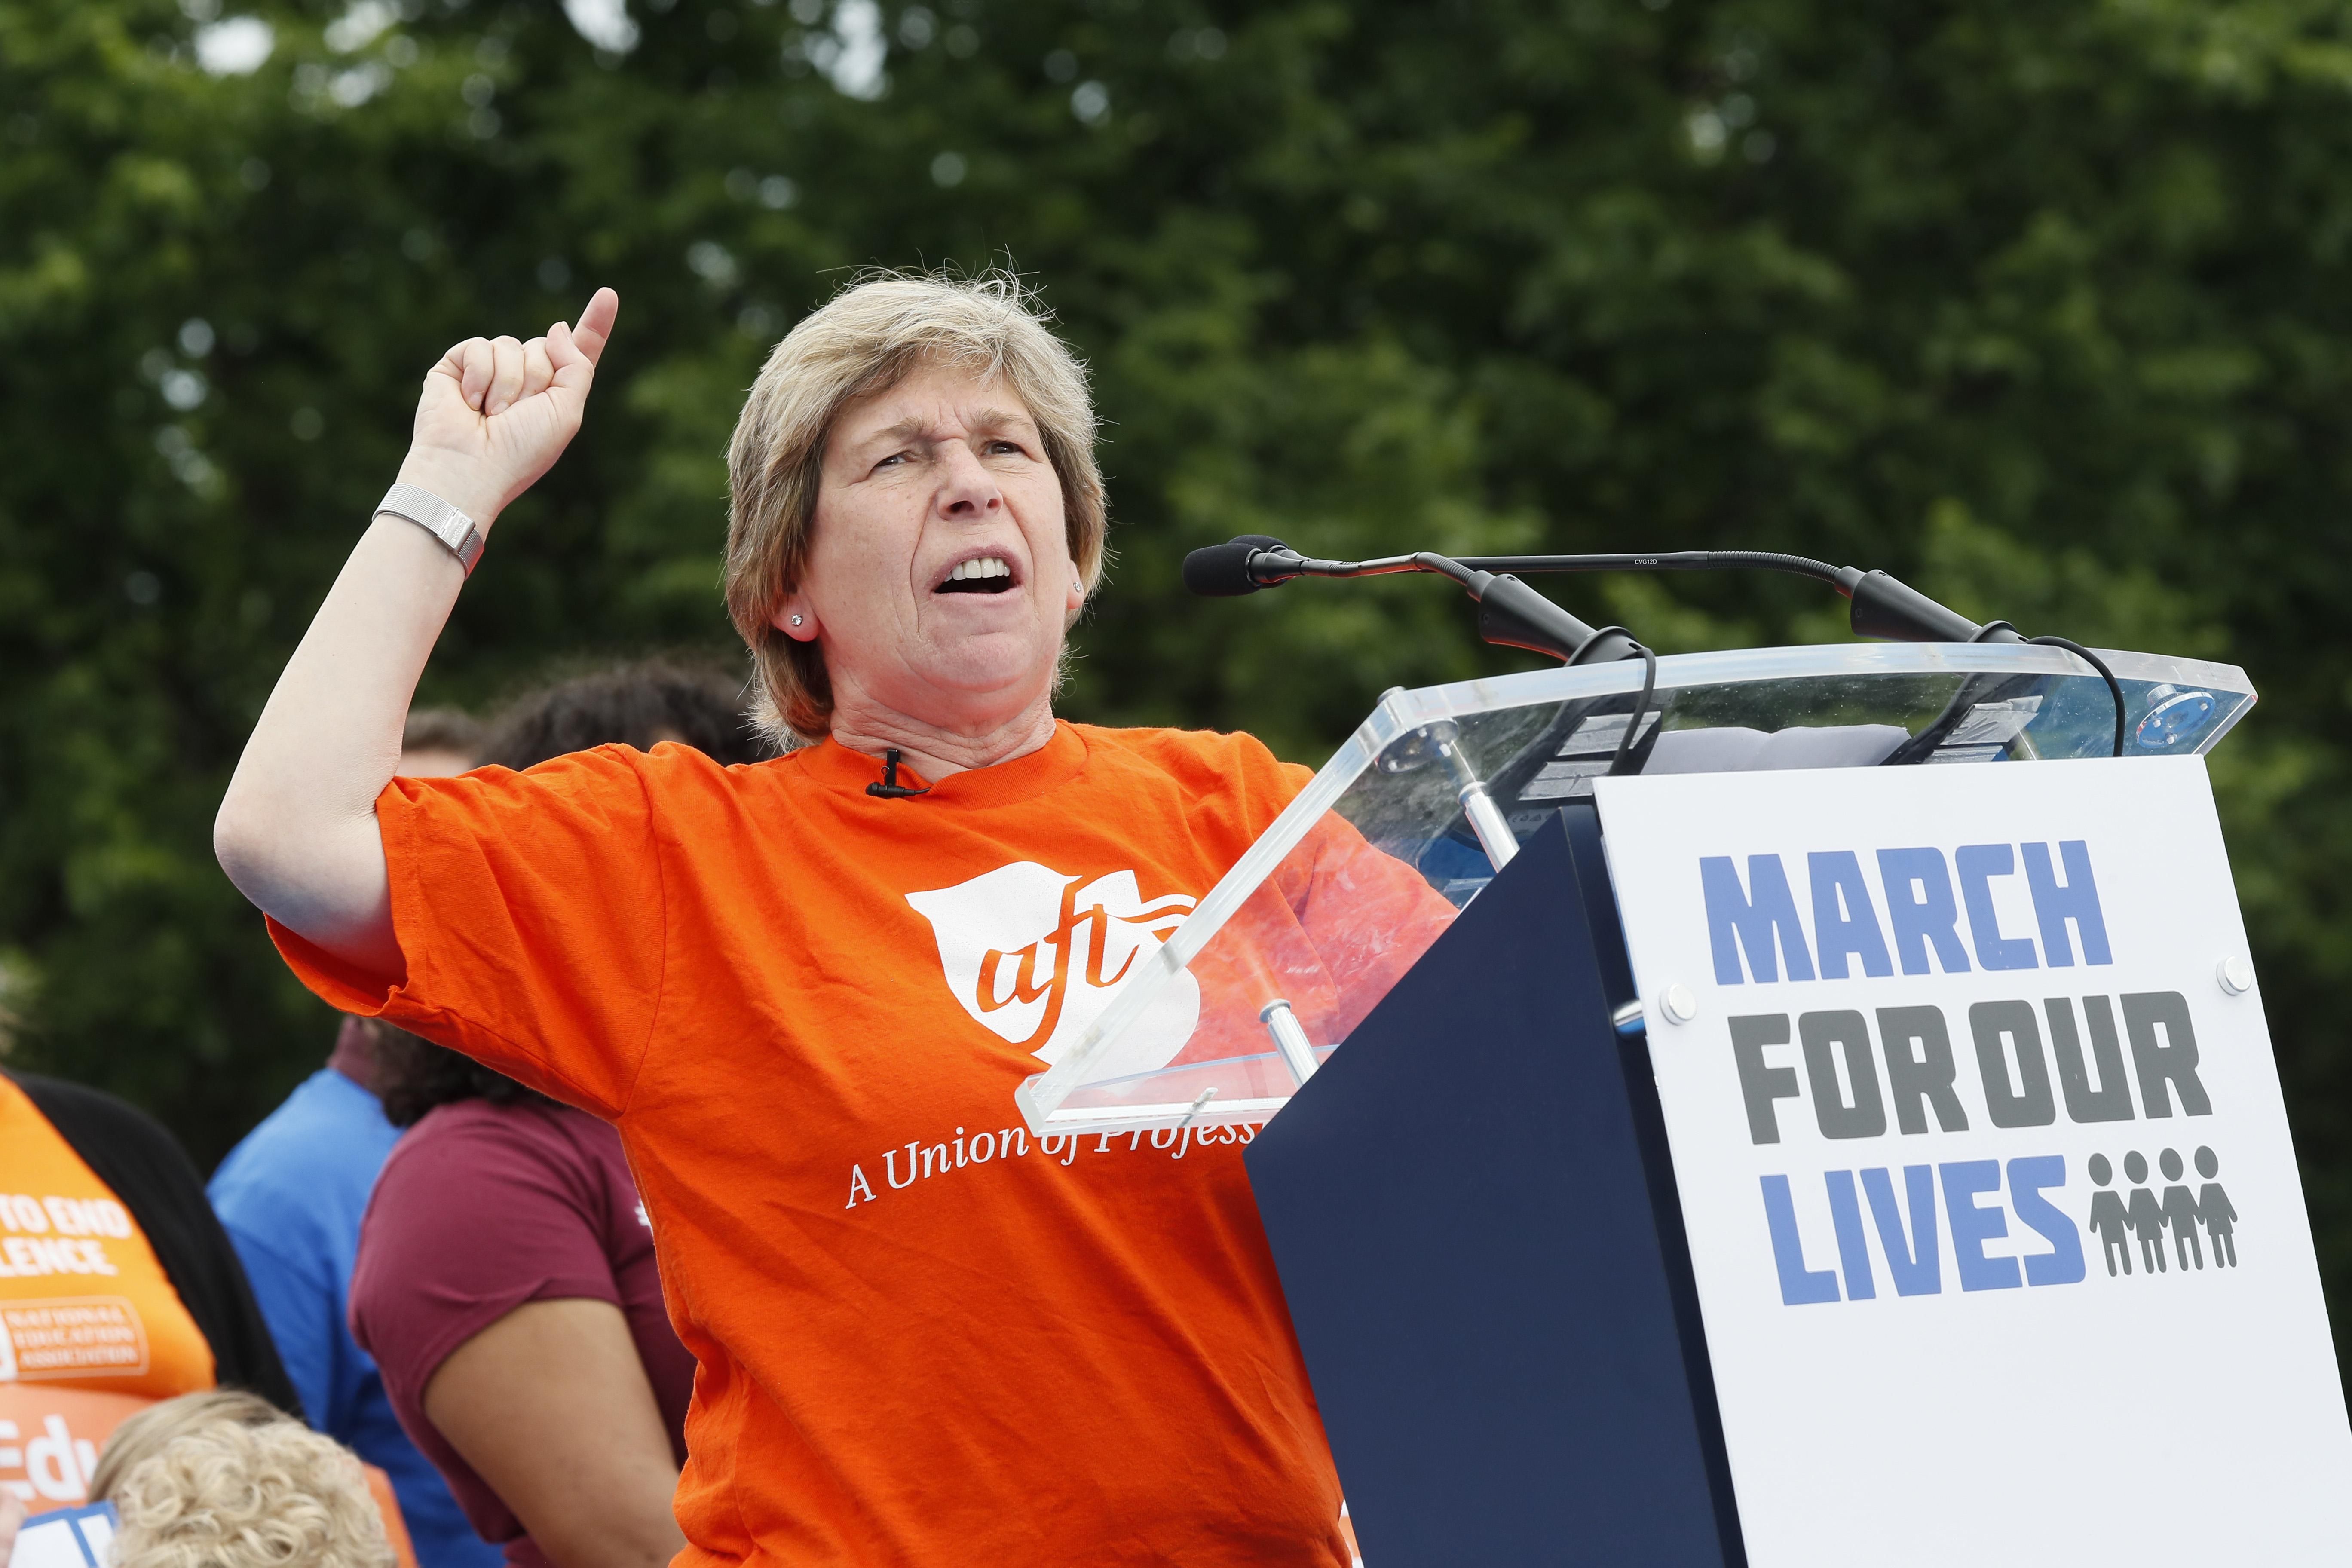 Randi Weingarten, president of the American Federation of Teachers, speaks during a March for Our Lives rally on June 11, 2022 in Washington, D.C.